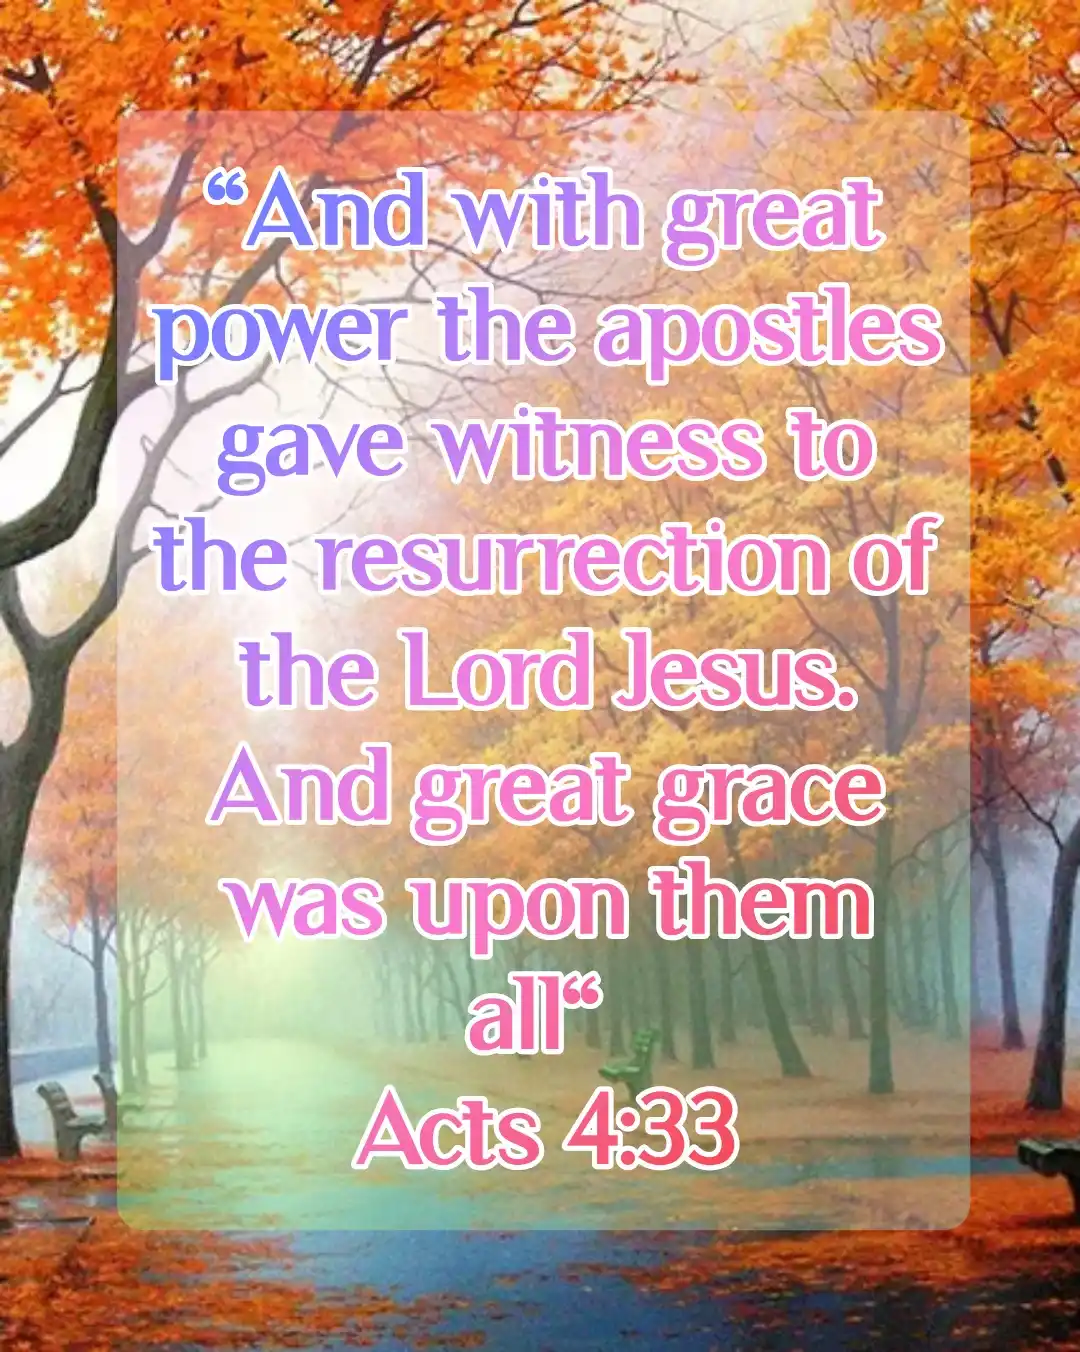 Today Bible Verse (Acts 4:33)